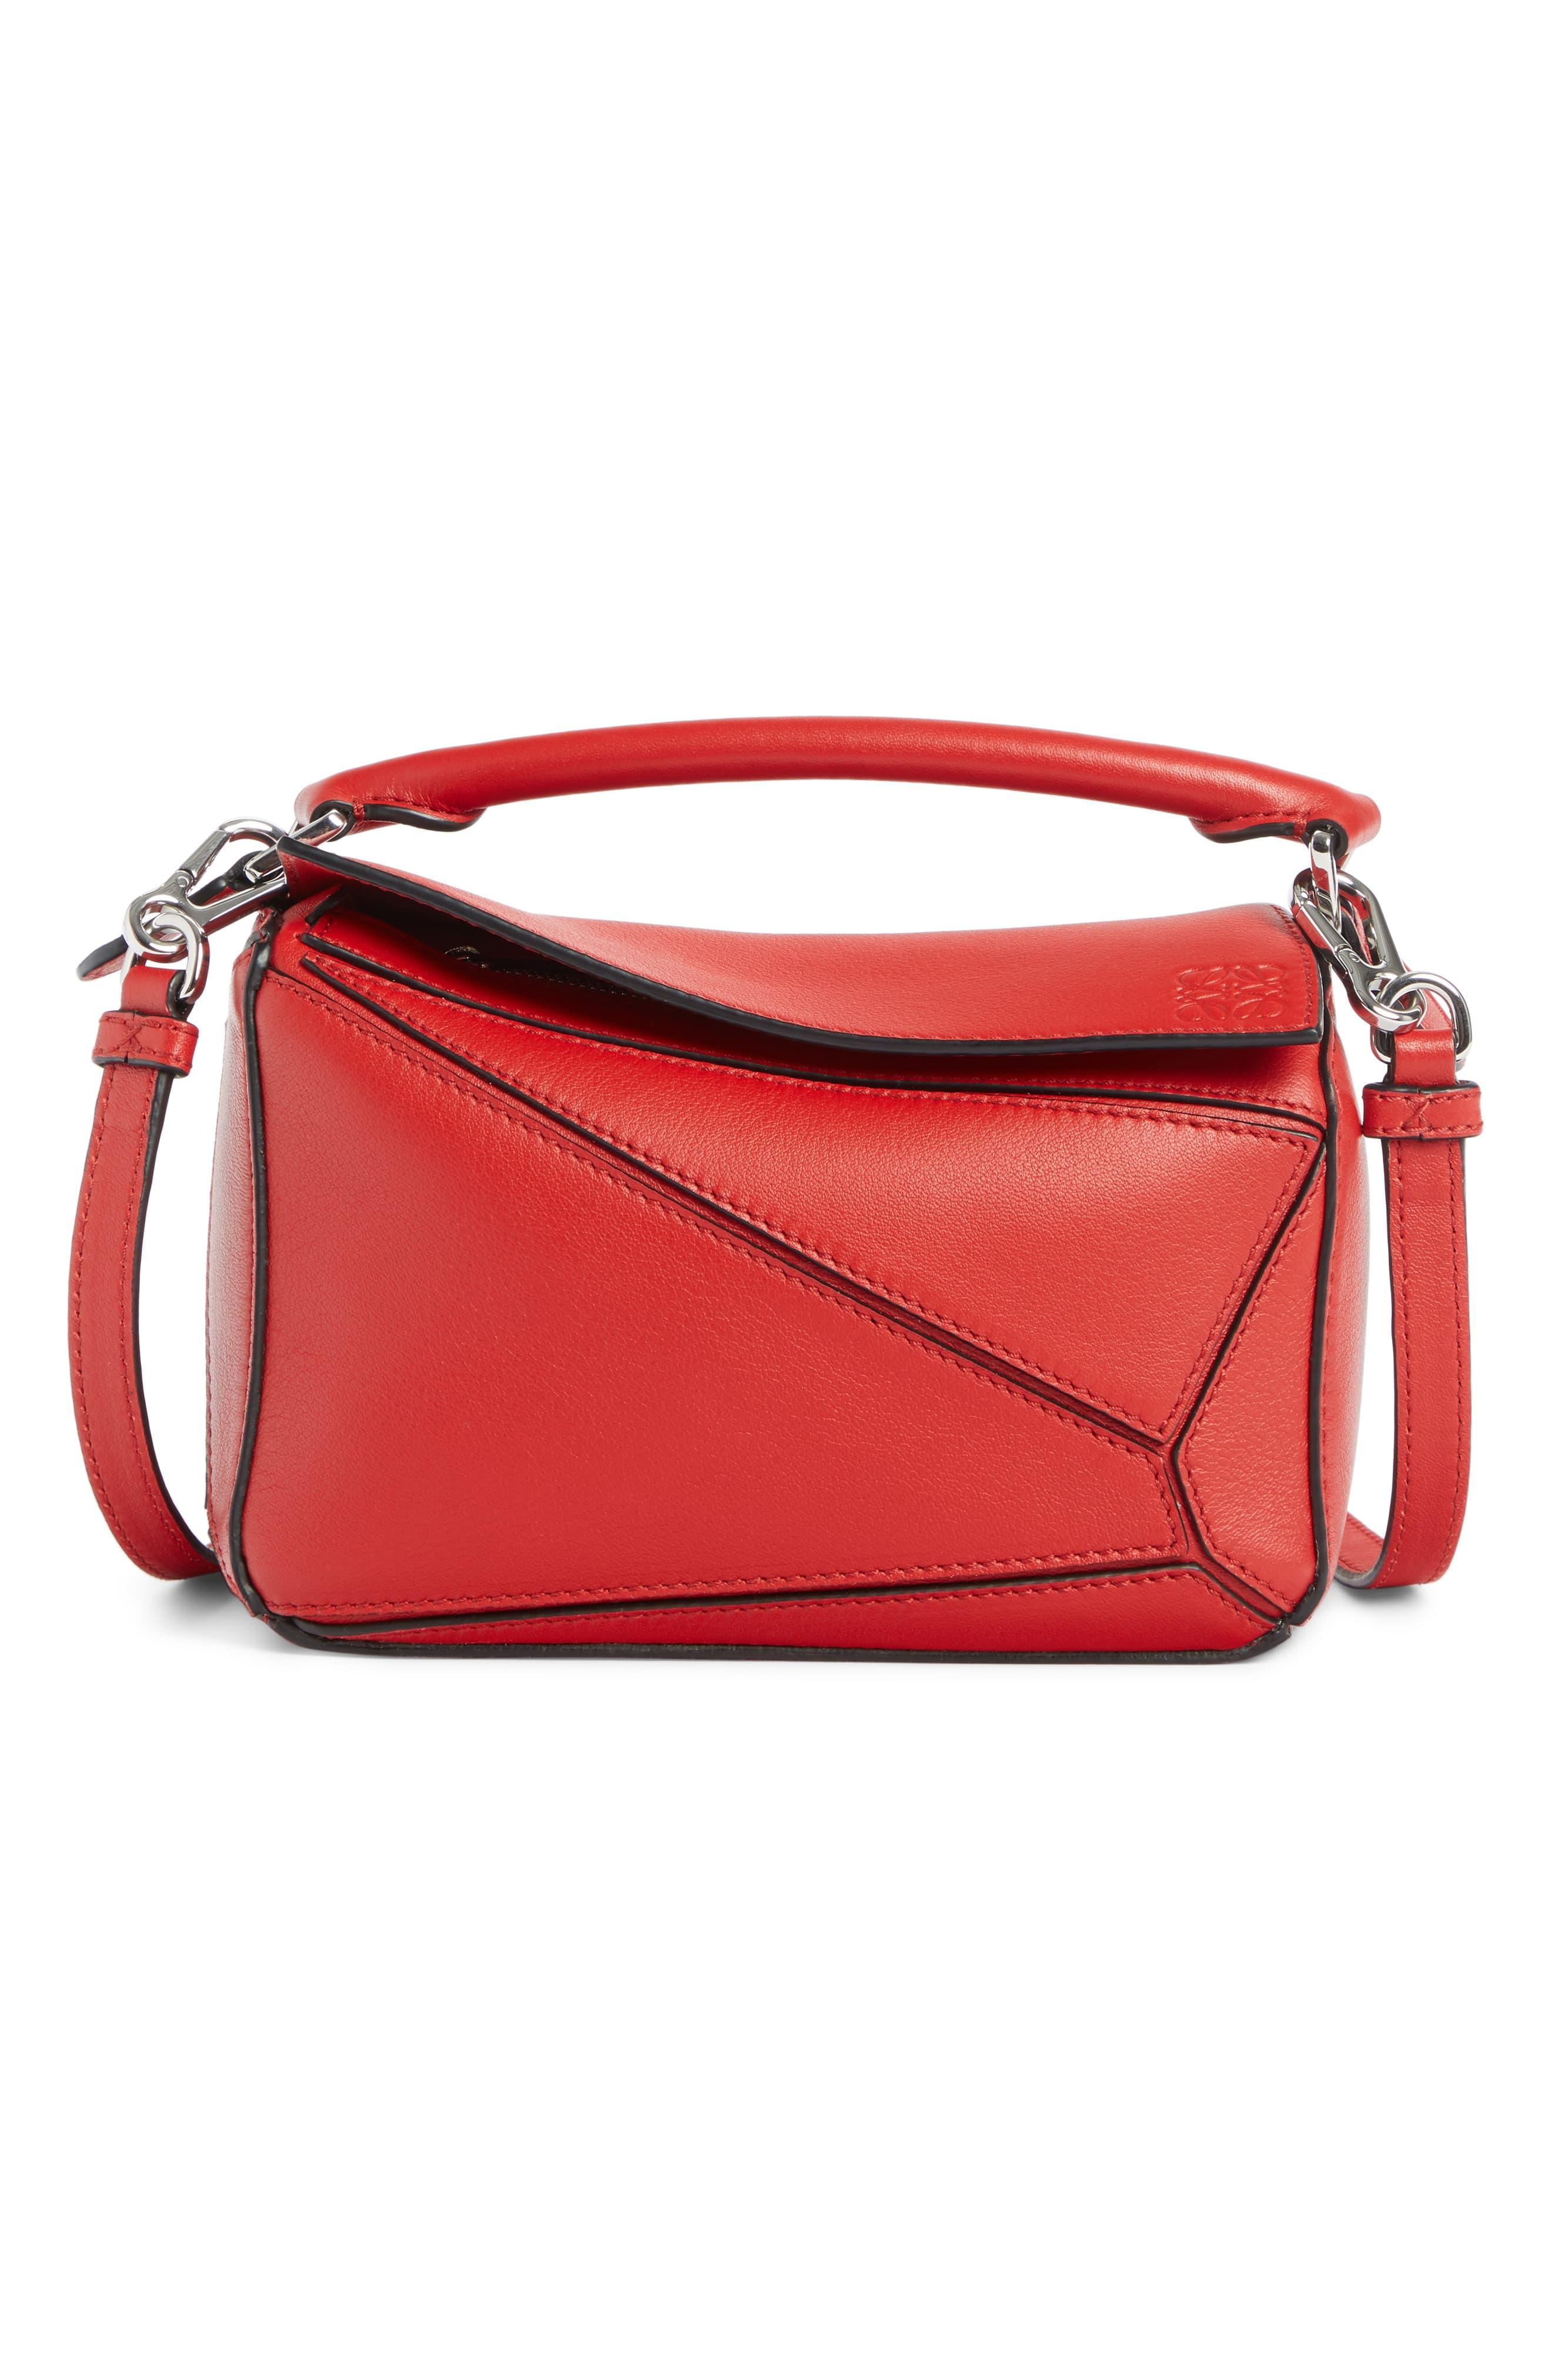 Loewe Leather Puzzle Mini Classic Satchel Bag in Scarlet Red (Red) - Lyst